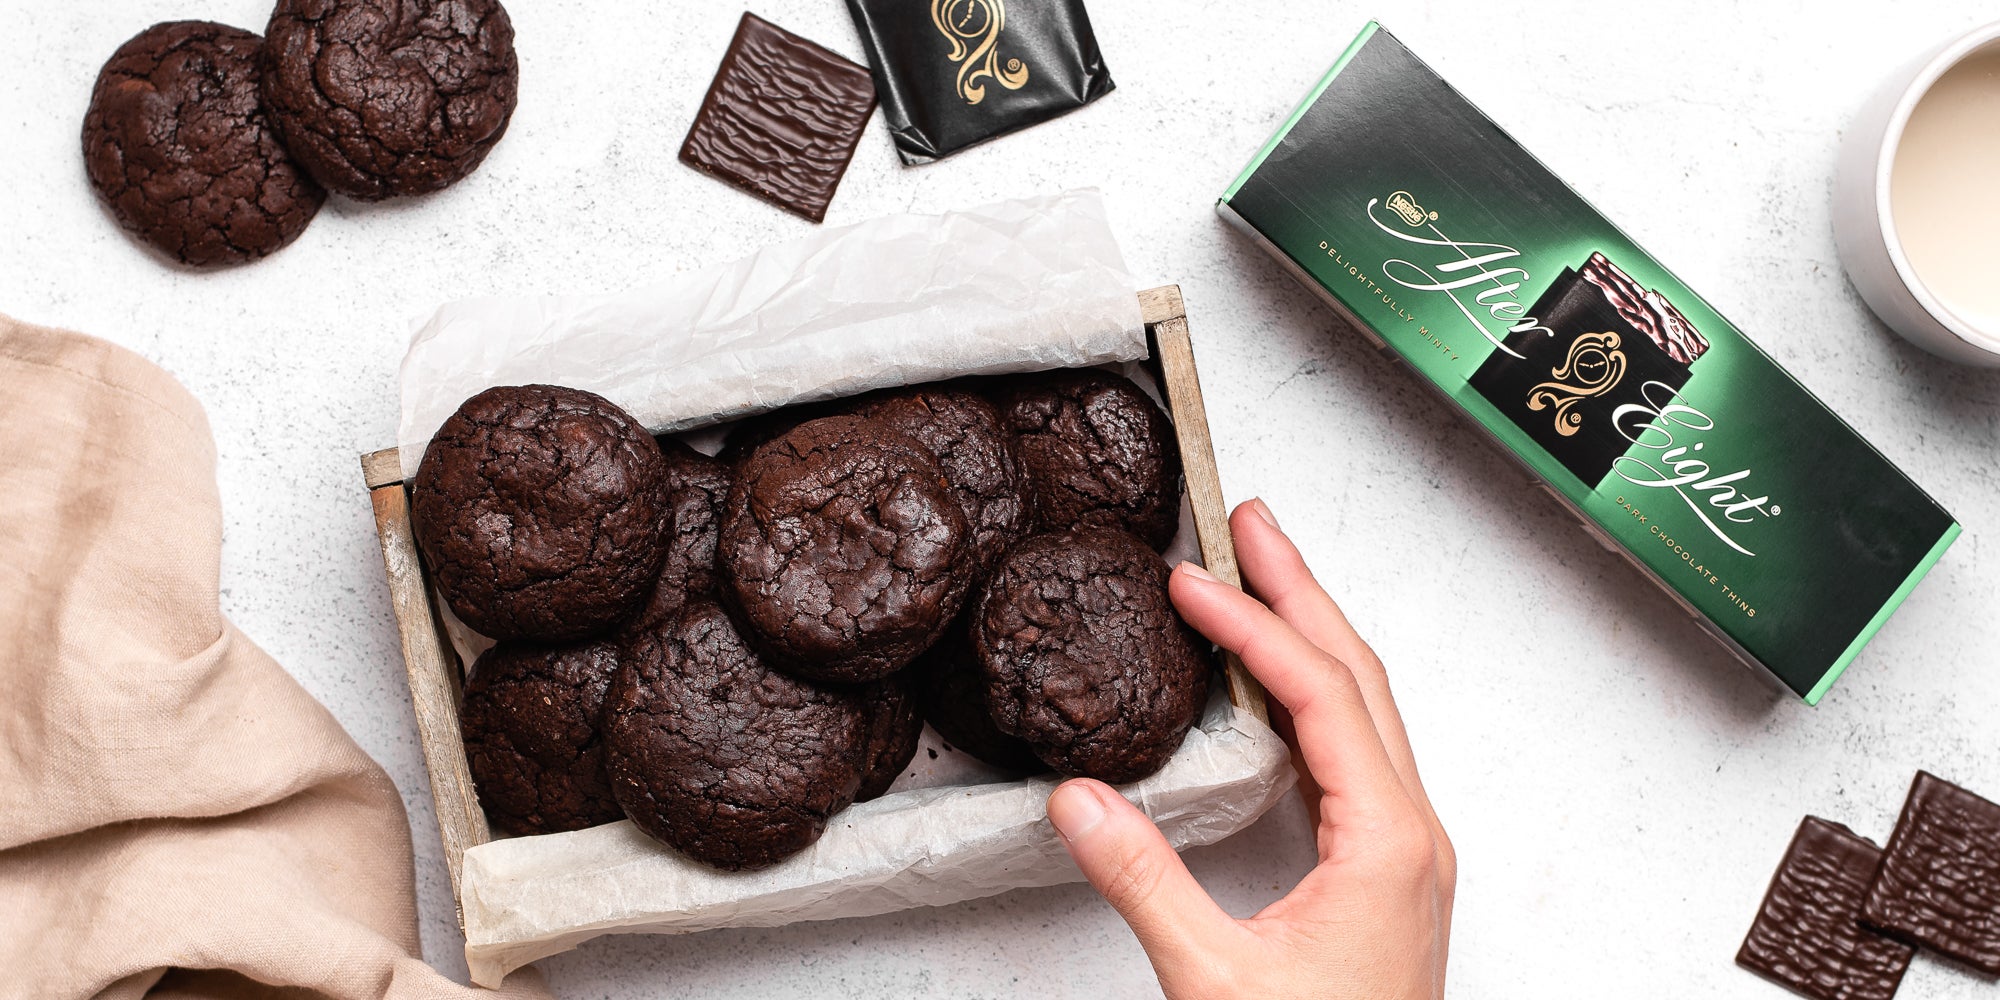 Chocolate Brownie Cookies stuffed with After Eight chocolate mints with a hand reaching for one